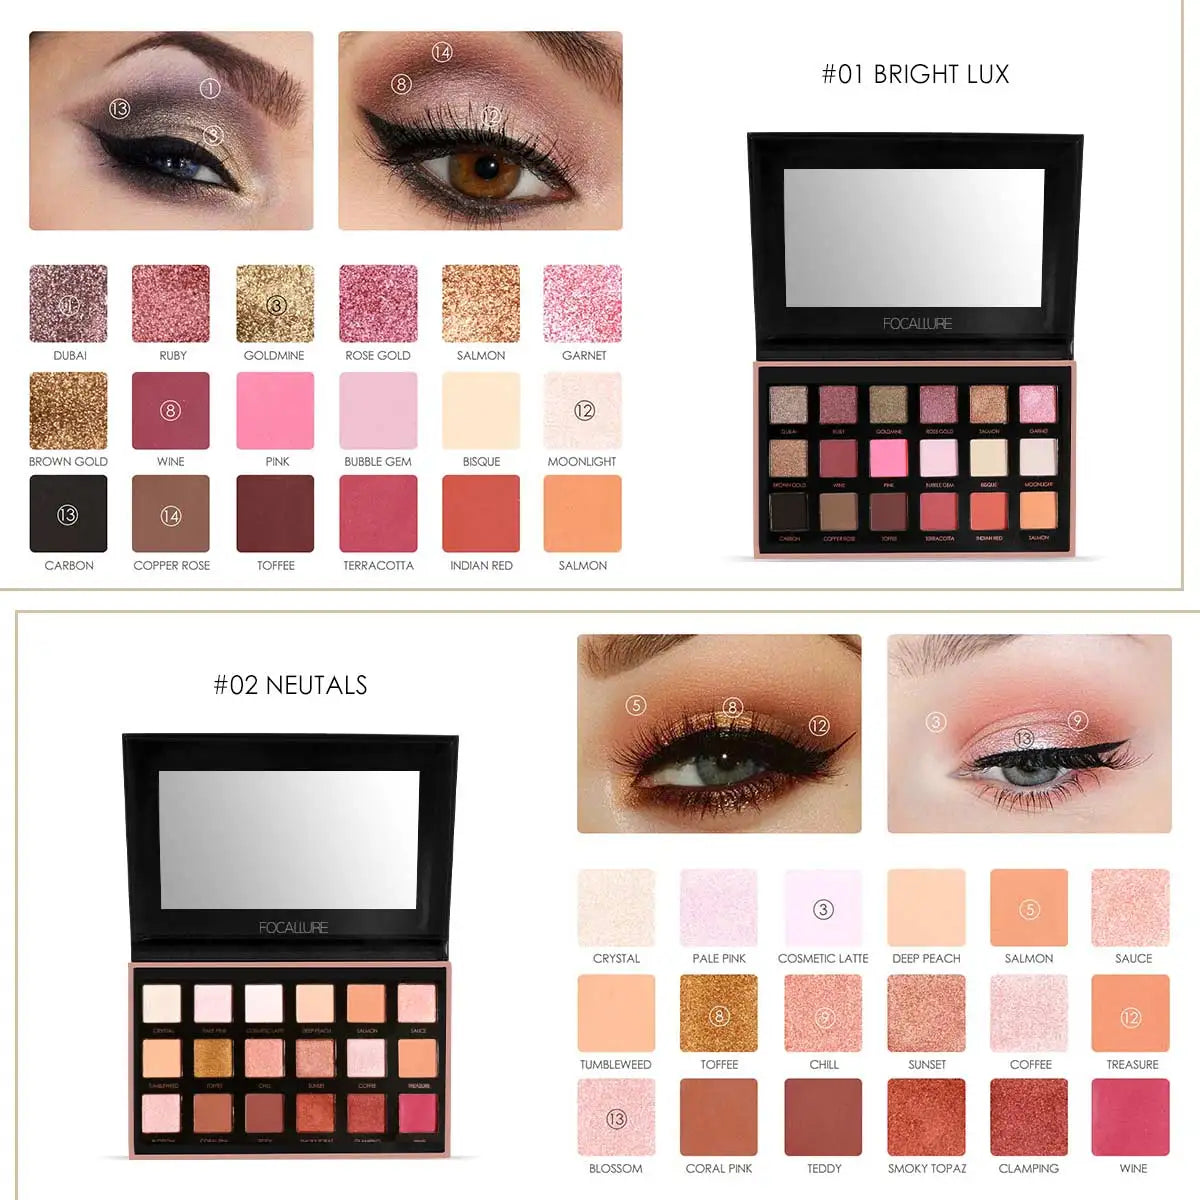 Nude Elegance: 18 Colors Matte Shimmer Eyeshadow Palette - Perfect for Glittery Smoky Eyes and Elegant Nude Makeup - AGTC